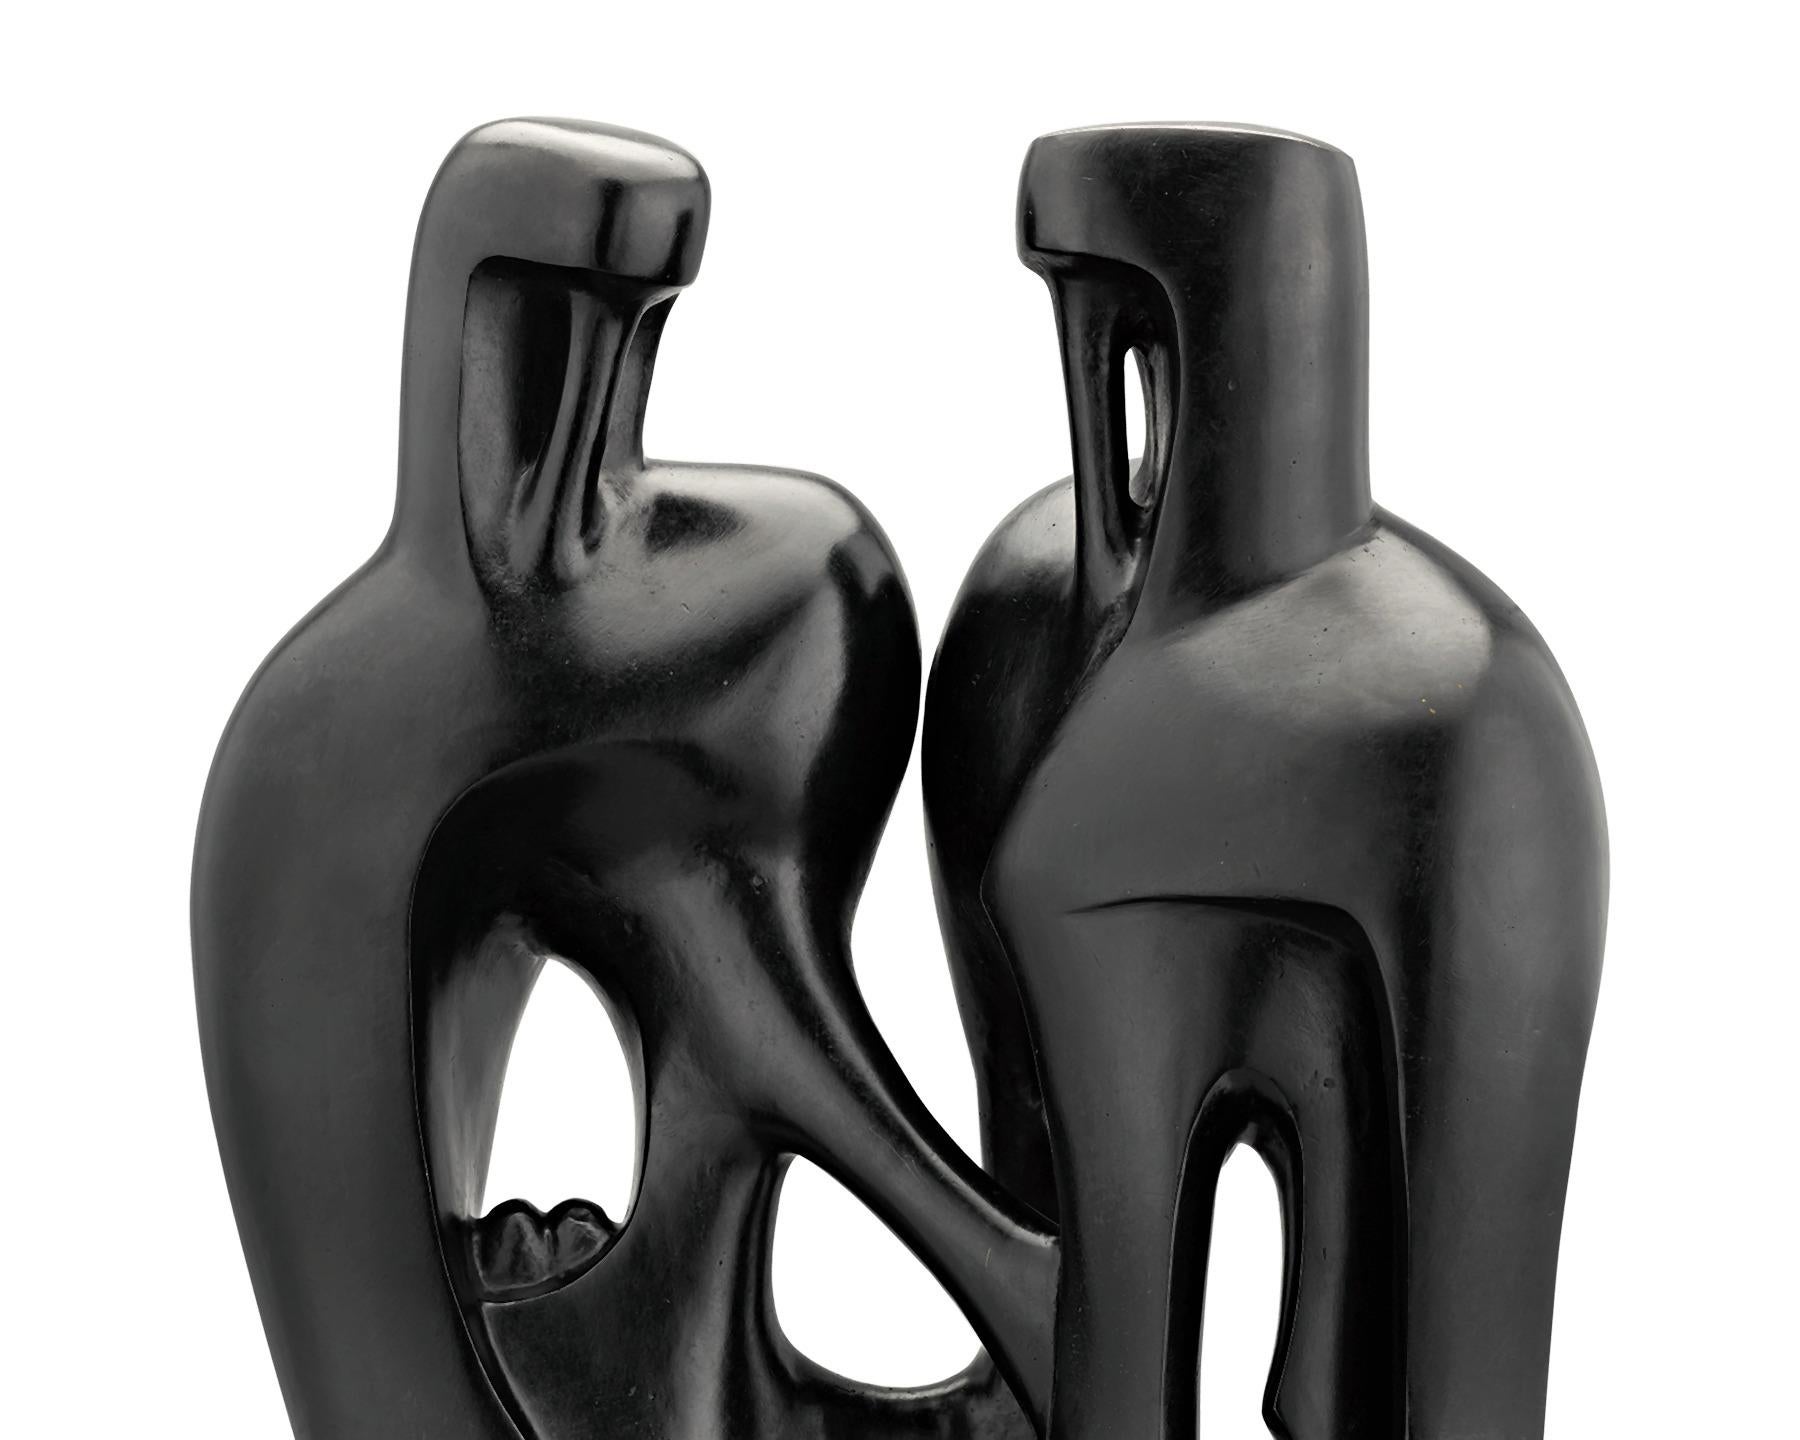 
Infused with a crisp modernity and subtle sensuality, this bronze sculpture by Cuban-born artist Agustin Cárdenas is an exceptional example of late-20th-century Latin American art. Depicting two figures locked in an intimate embrace, Couple